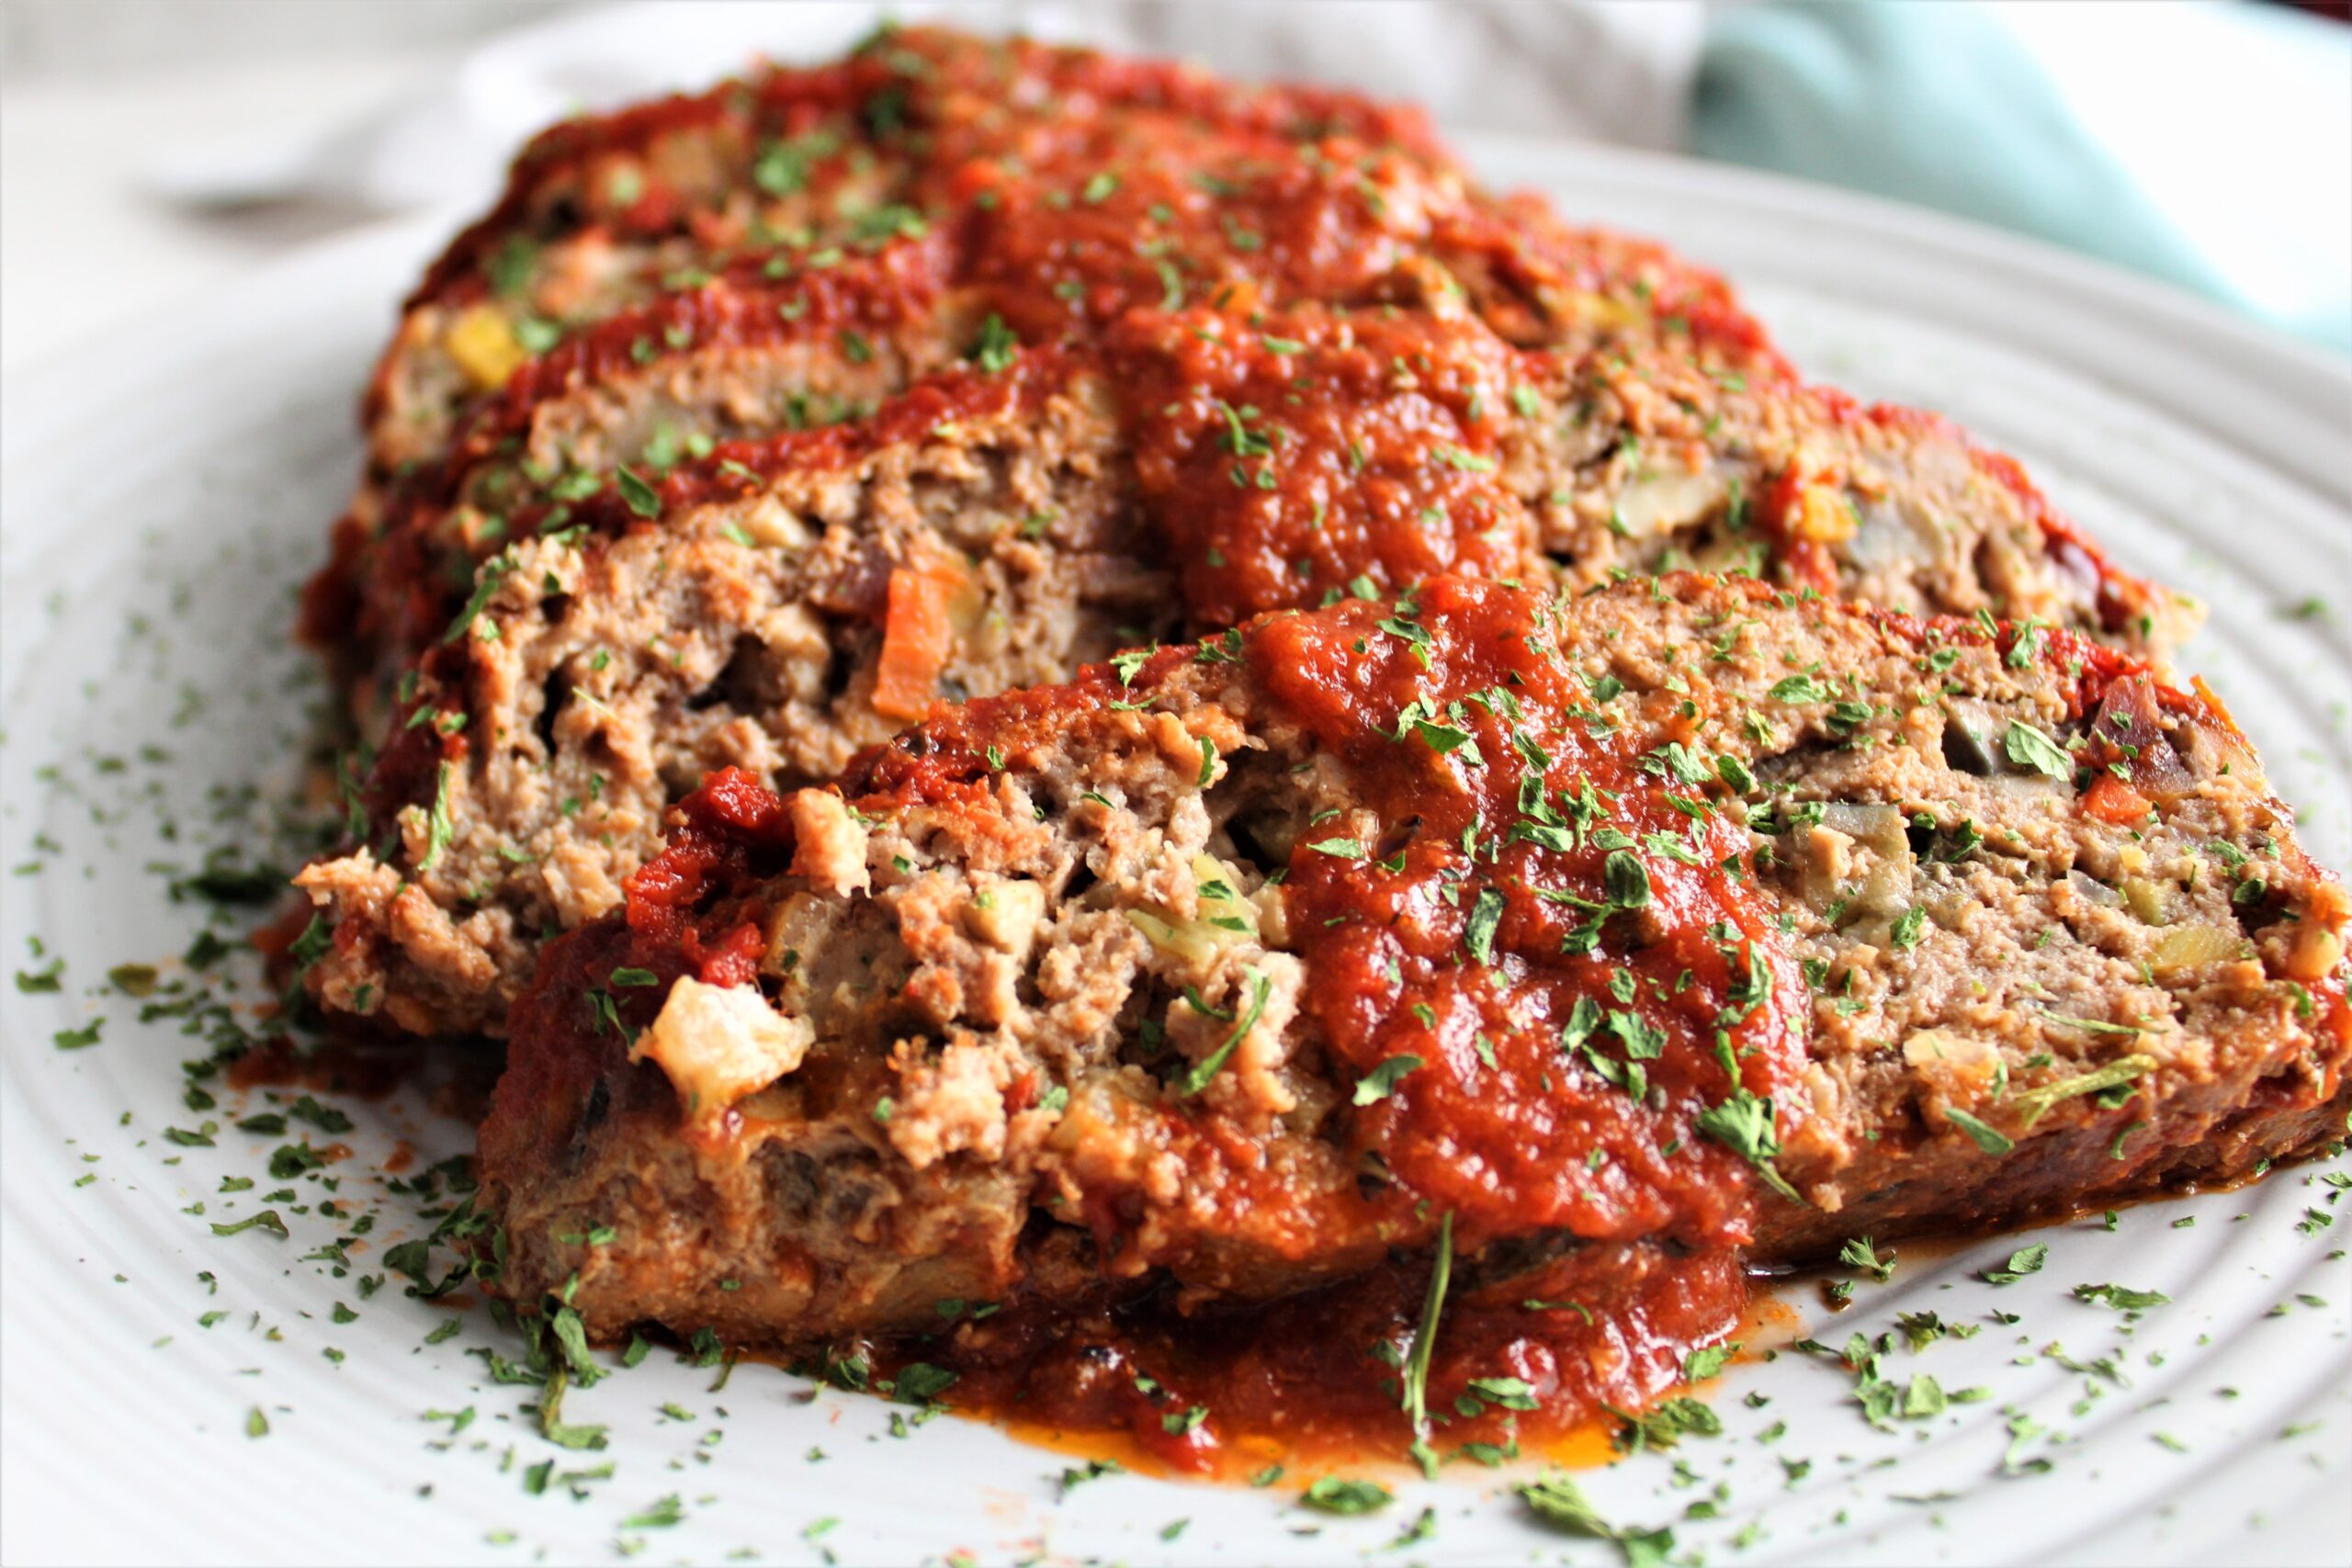 Classic Comfort: How to Make the Perfect Meatloaf Recipe - Keeping it Lucy